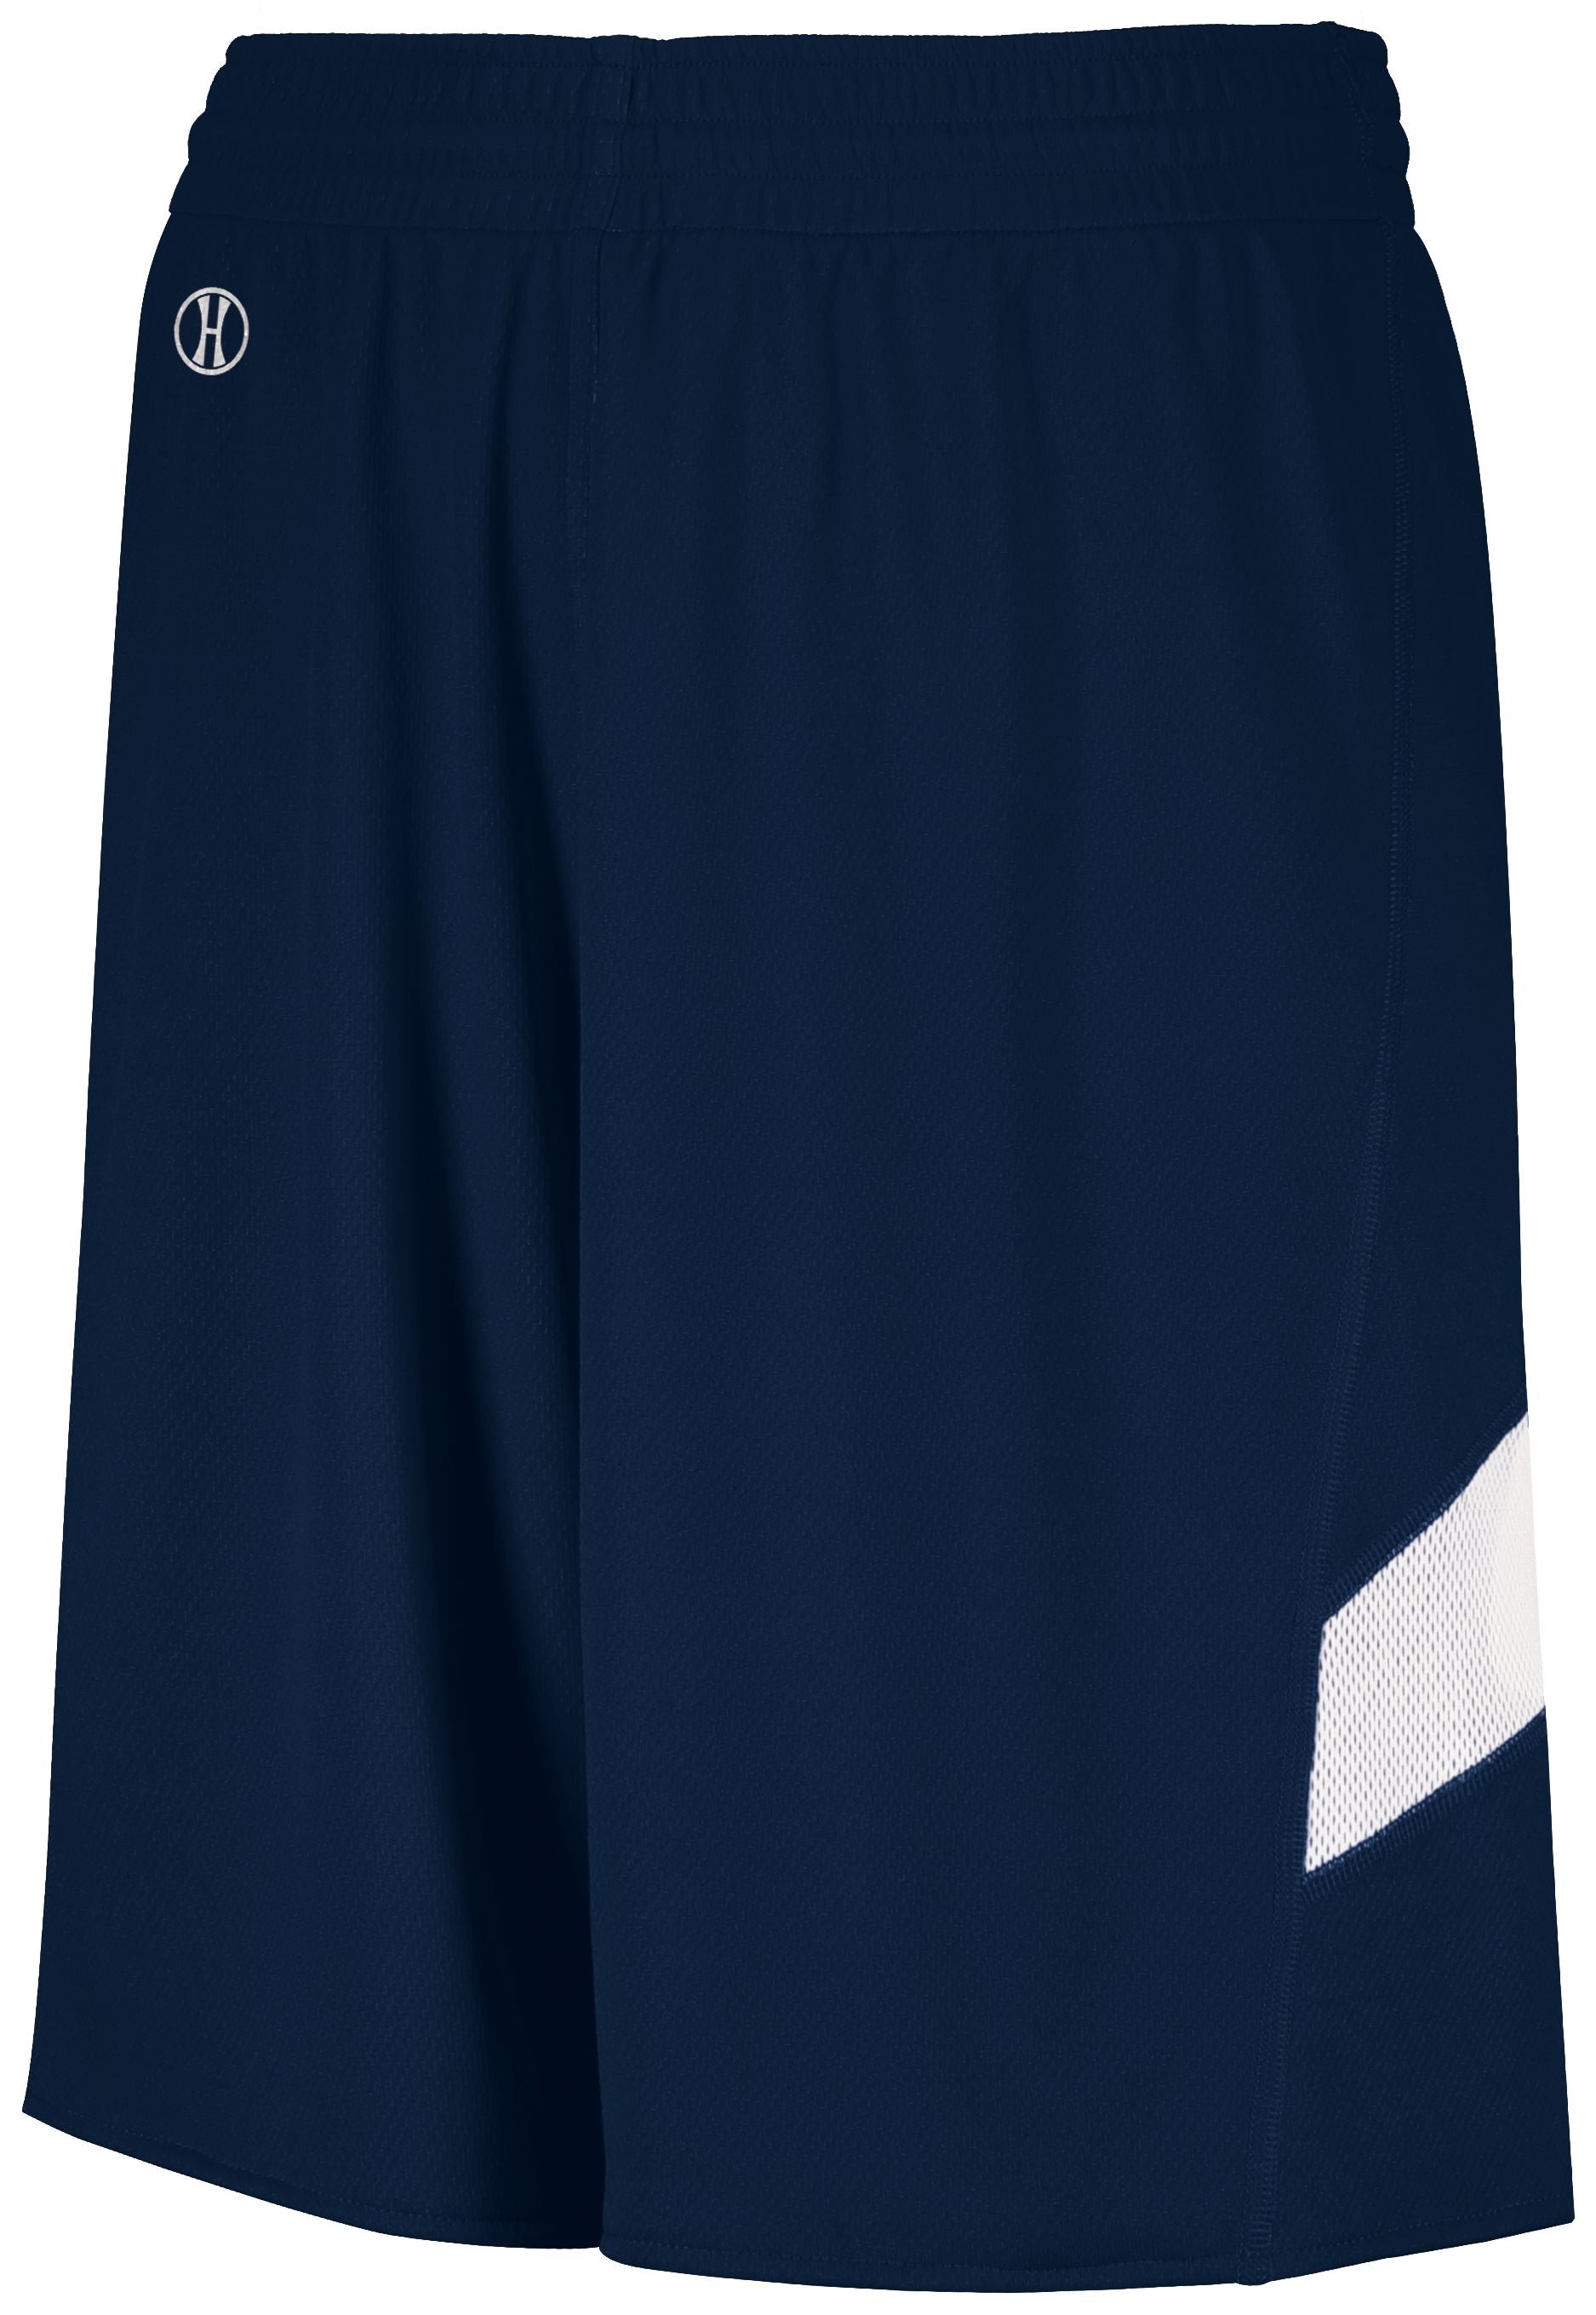 Holloway Dual-Side Single Ply Shorts in Navy/White  -Part of the Adult, Adult-Shorts, Basketball, Holloway, All-Sports, All-Sports-1 product lines at KanaleyCreations.com